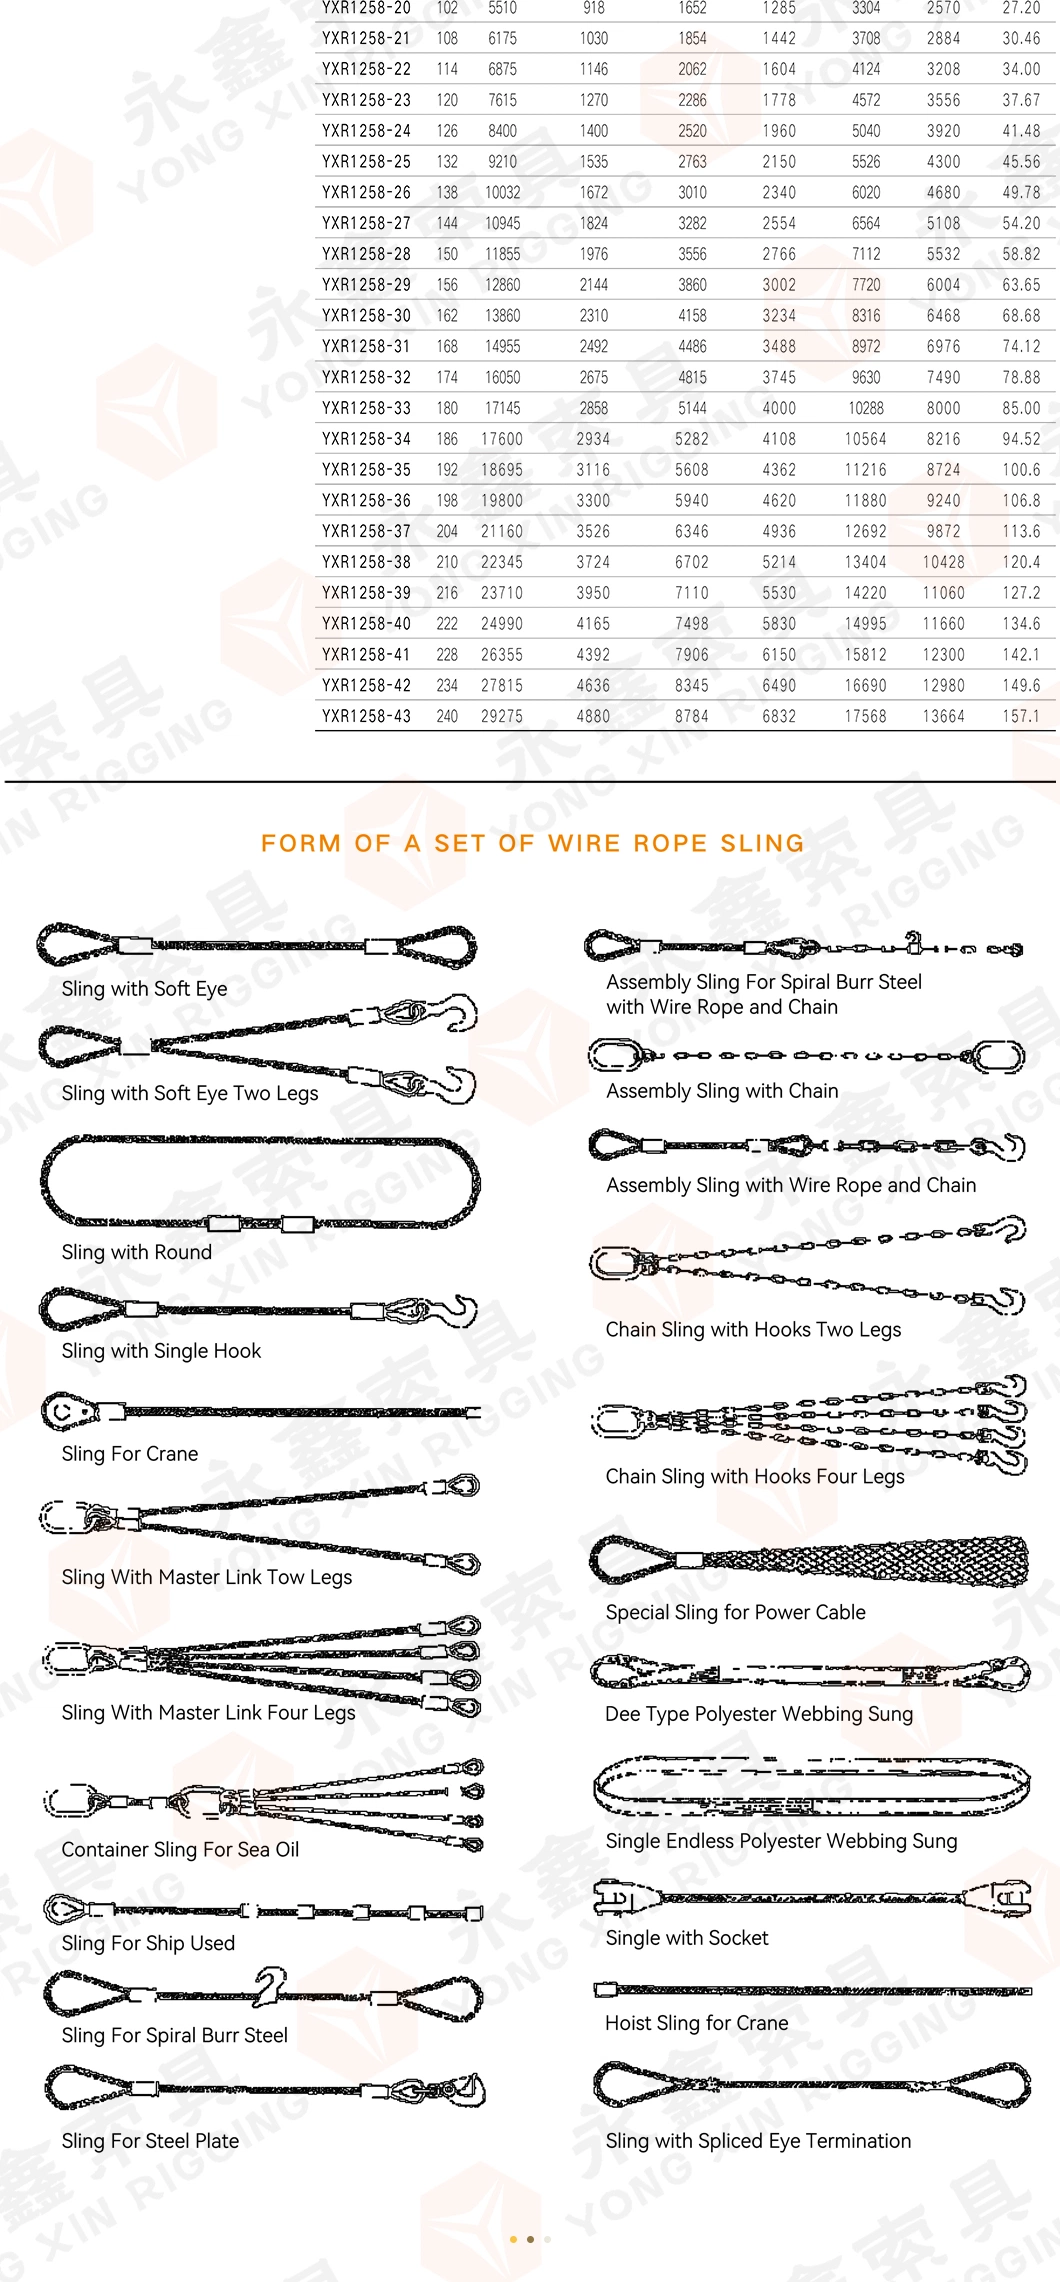 Superior Quality PVC Coated Steel Wire Rope Sling with Strong Snap Hook Carabiner